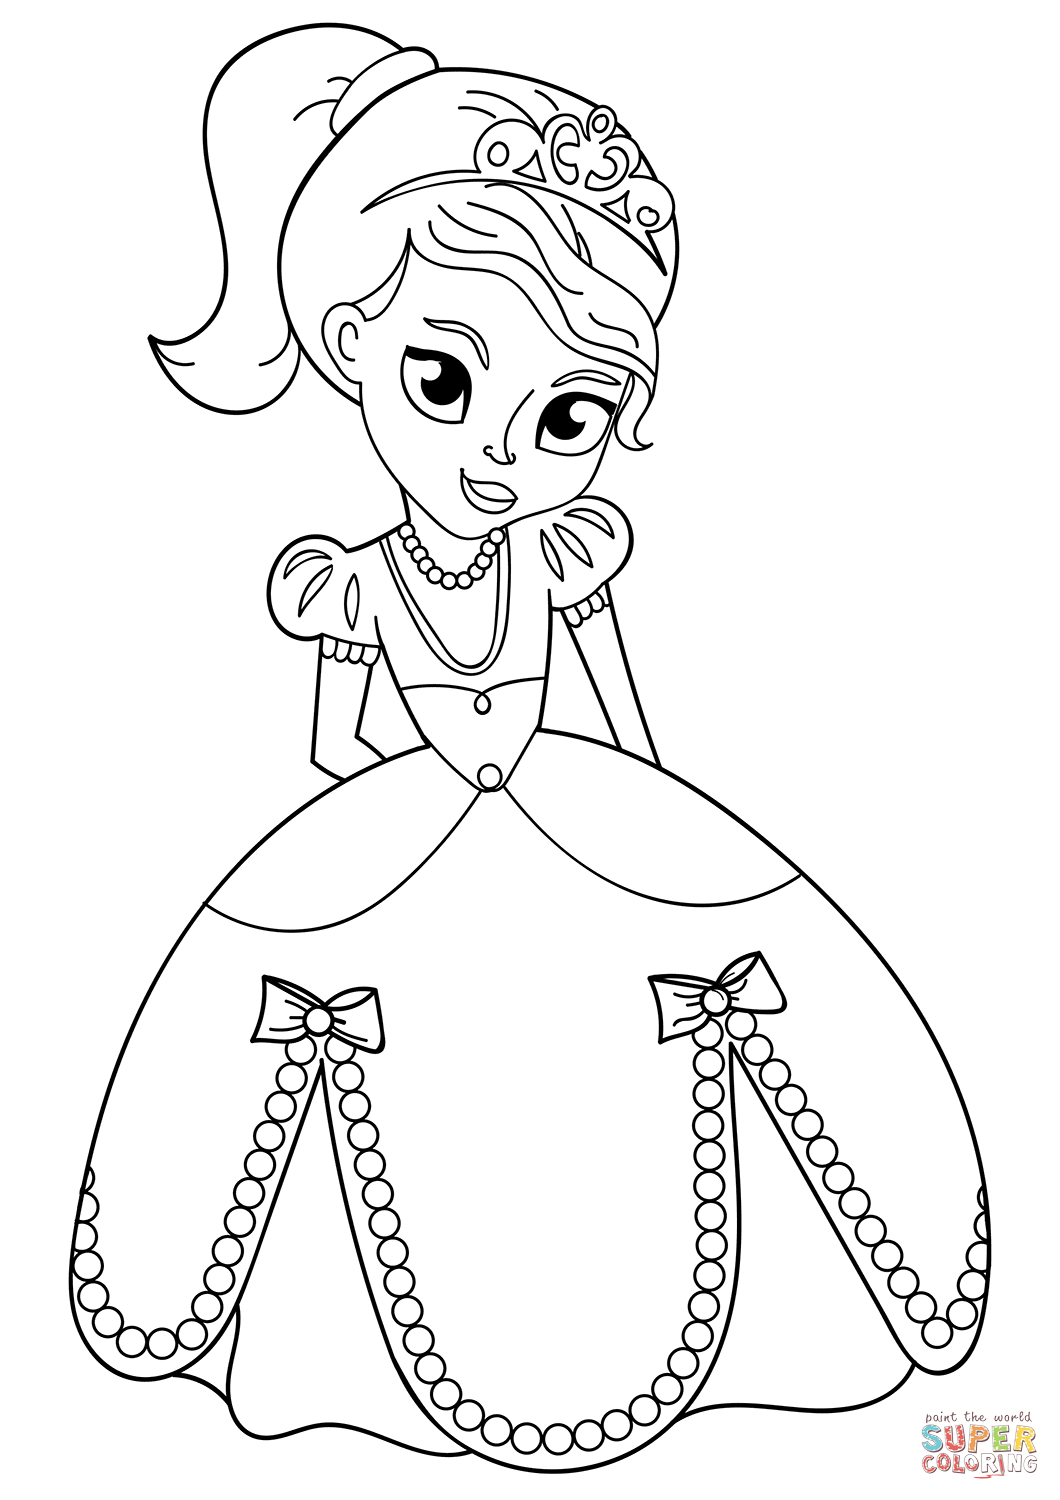 Cute princess coloring page free printable coloring pages